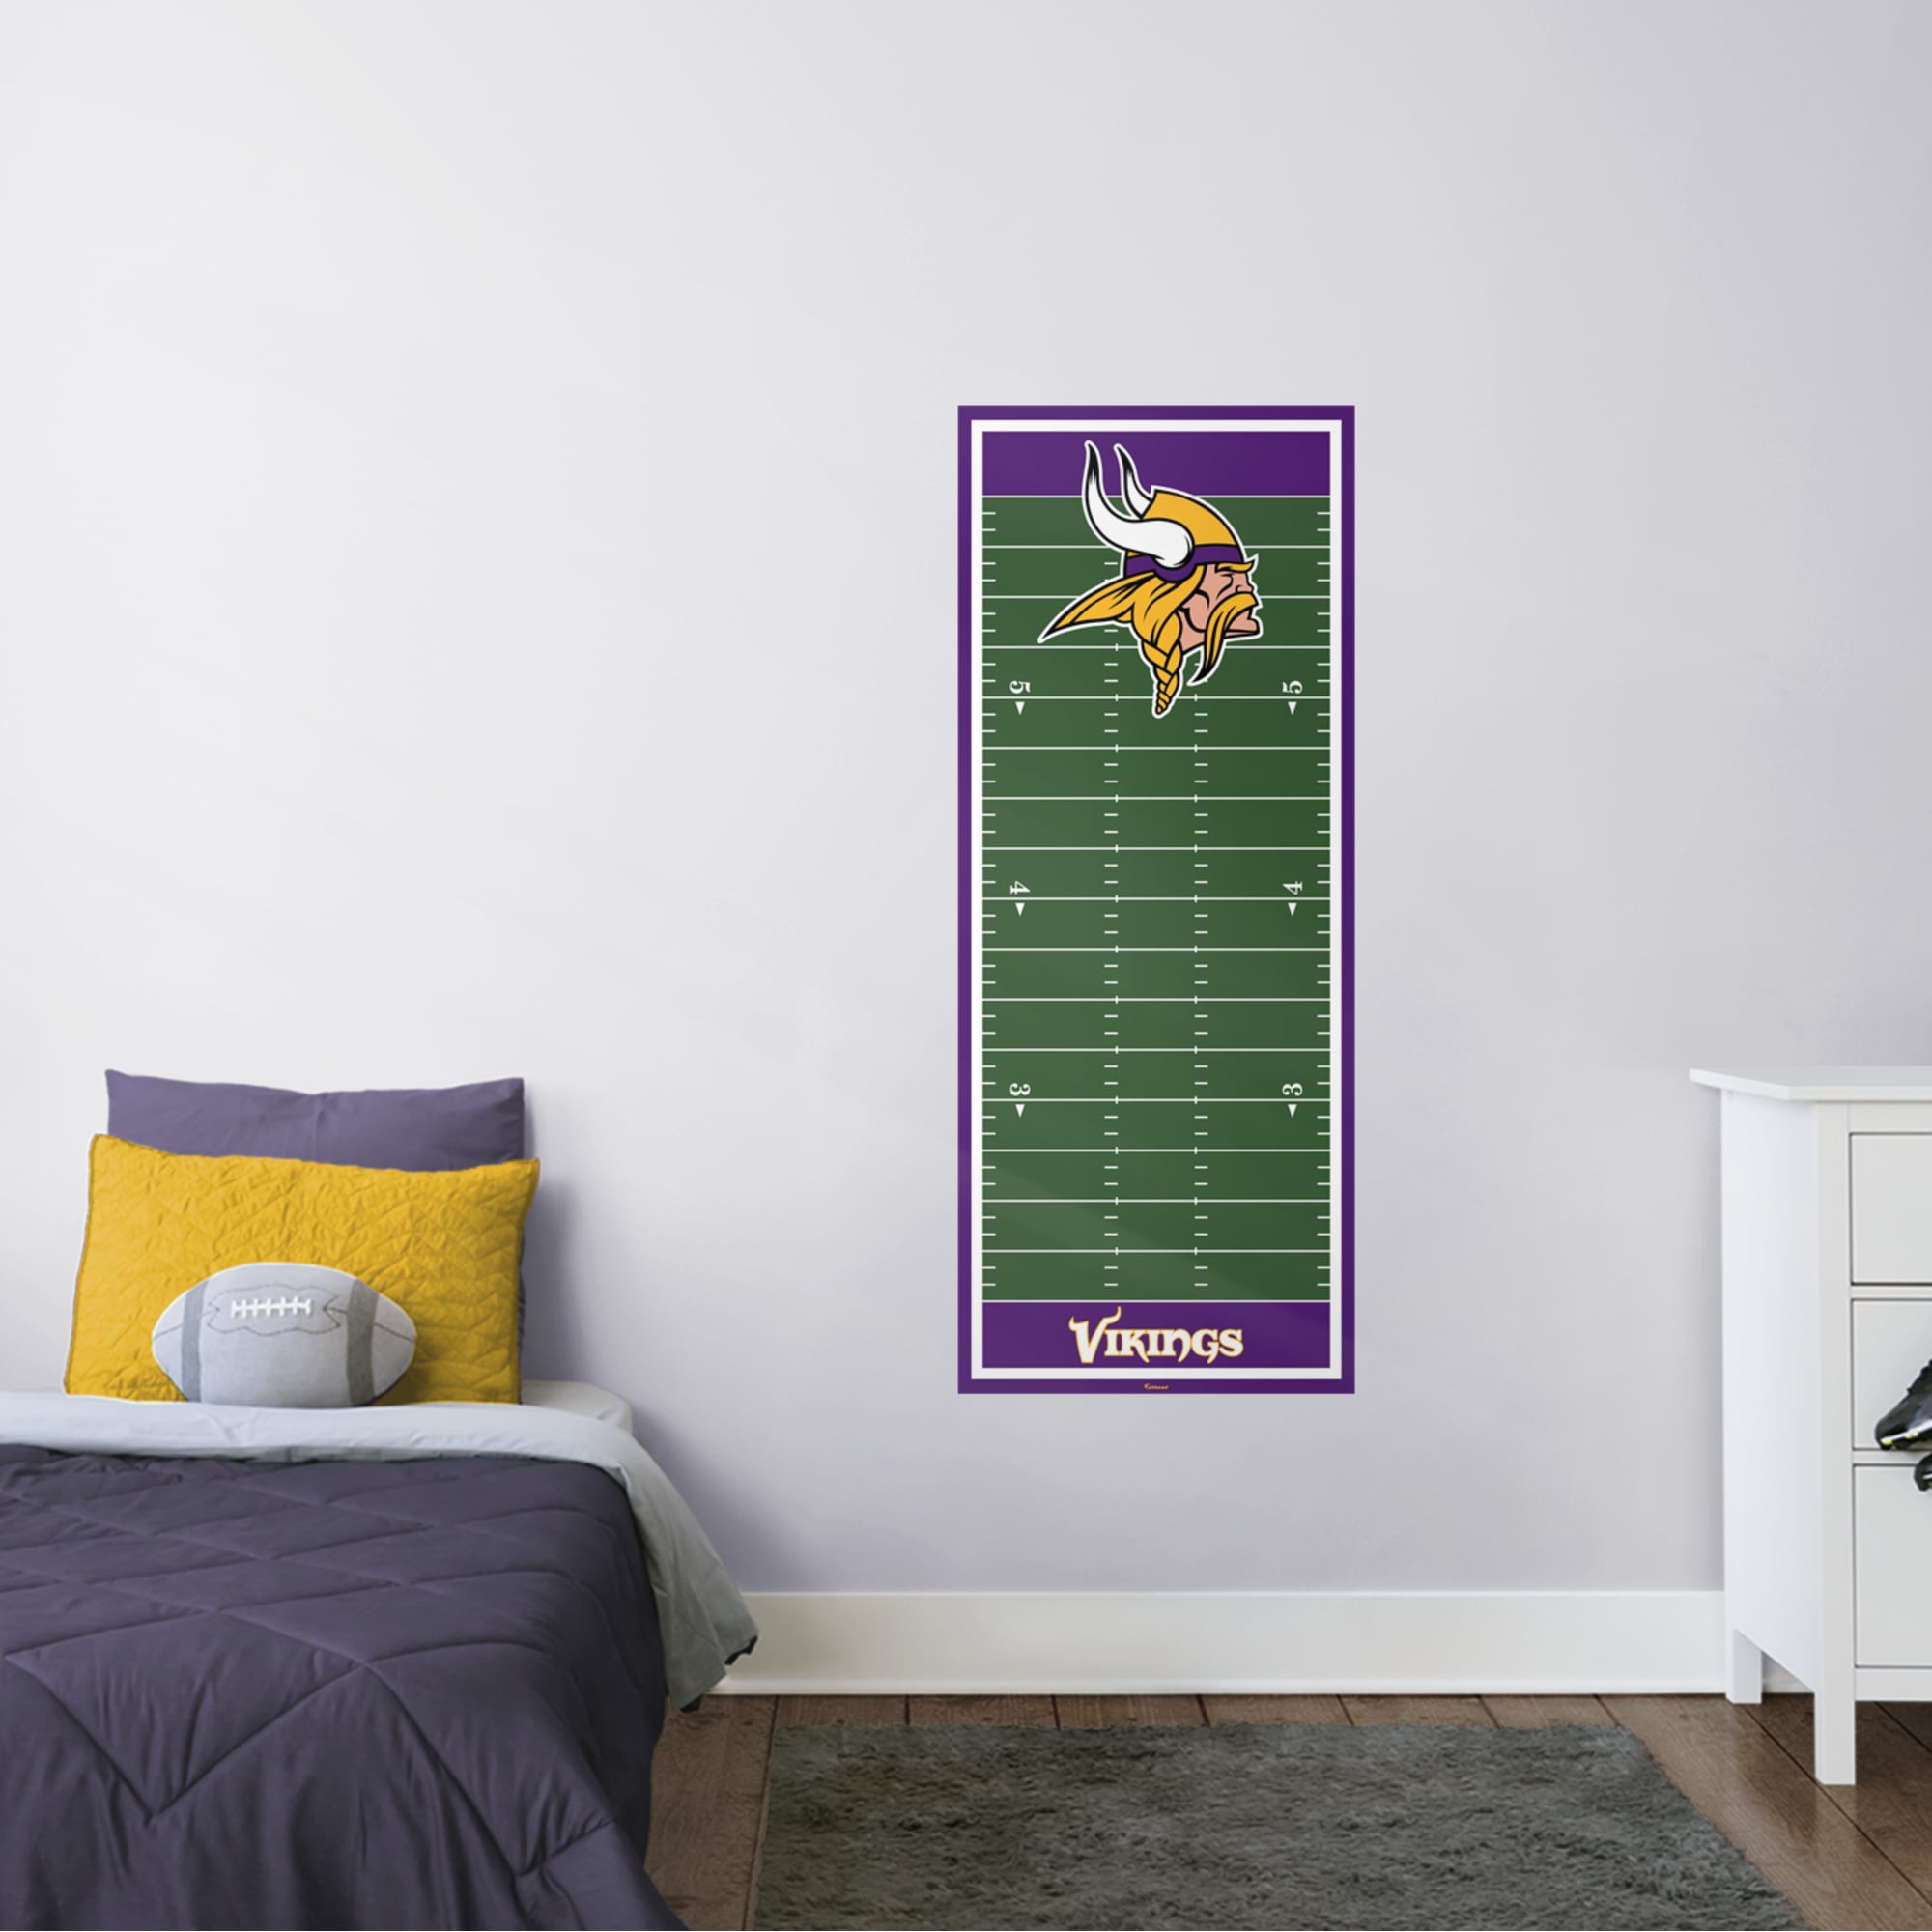 Minnesota Vikings: Growth Chart - Officially Licensed NFL Removable Wall Graphic 24.0"W x 59.0"H by Fathead | Vinyl